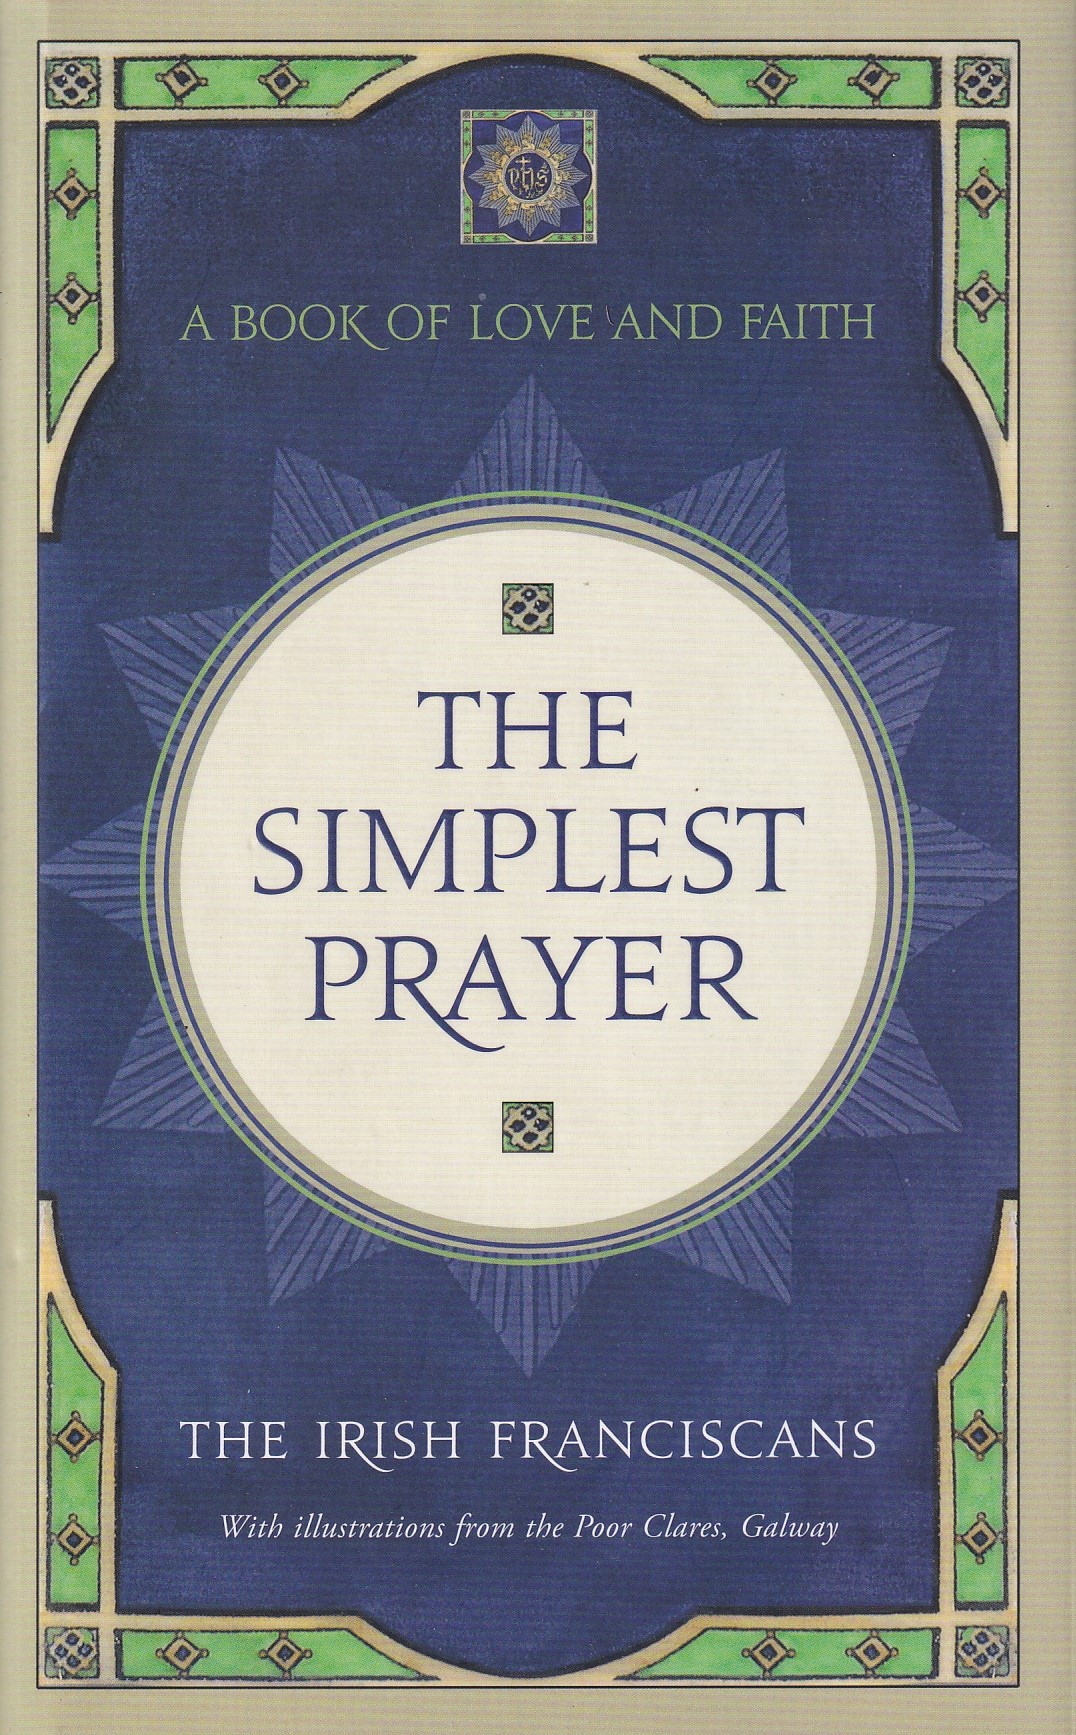 The Simplest Prayer | The Irish Franciscans | Charlie Byrne's